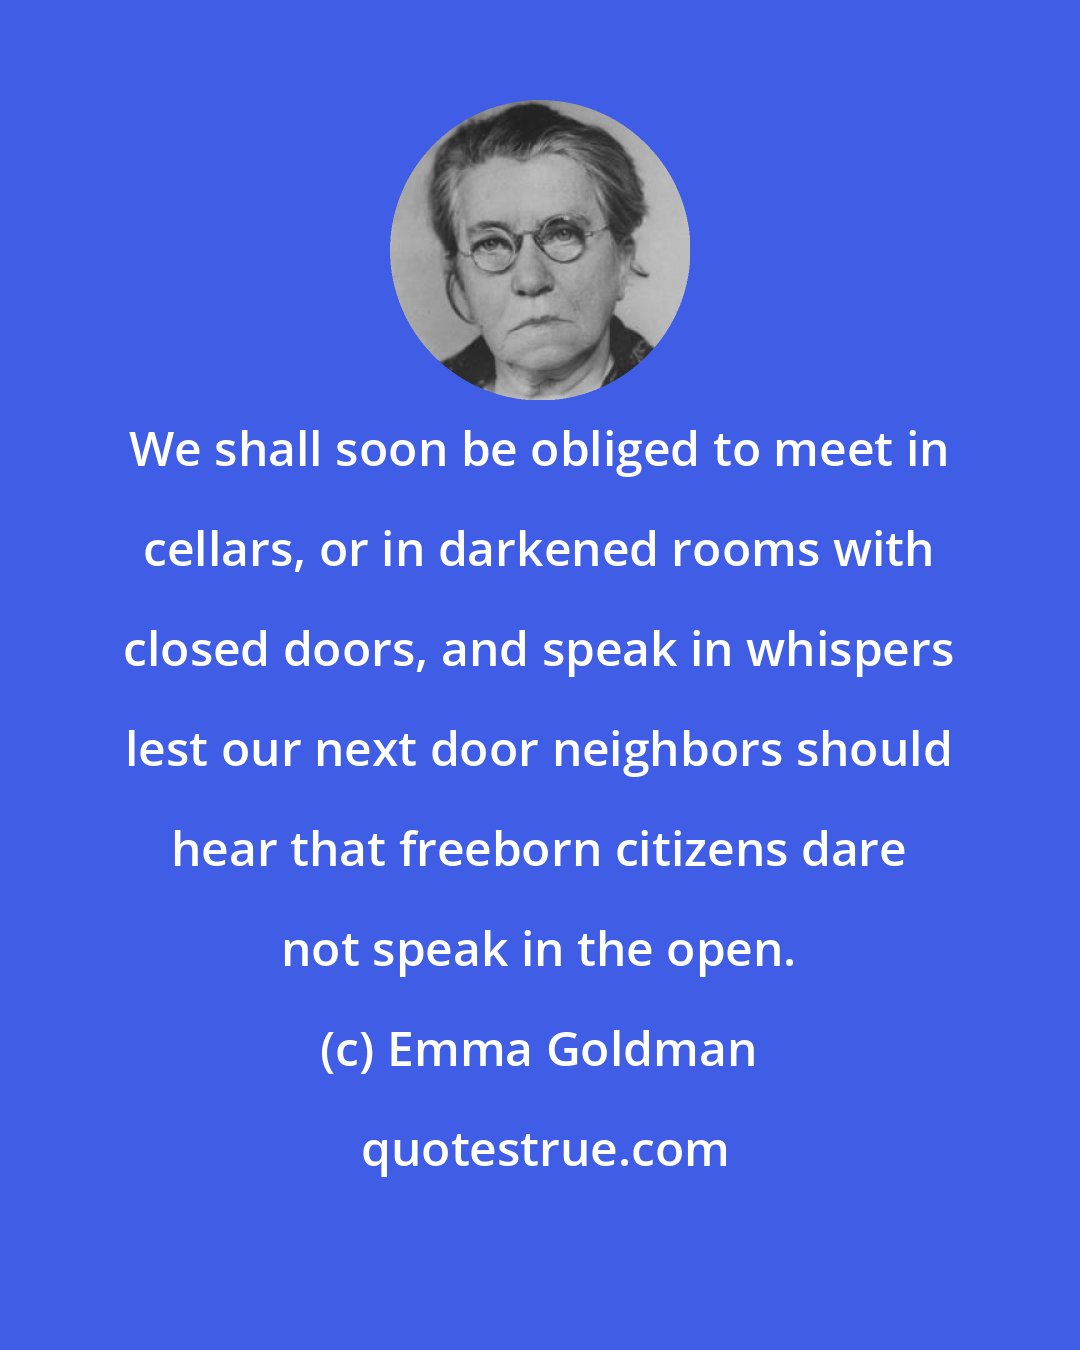 Emma Goldman: We shall soon be obliged to meet in cellars, or in darkened rooms with closed doors, and speak in whispers lest our next door neighbors should hear that freeborn citizens dare not speak in the open.